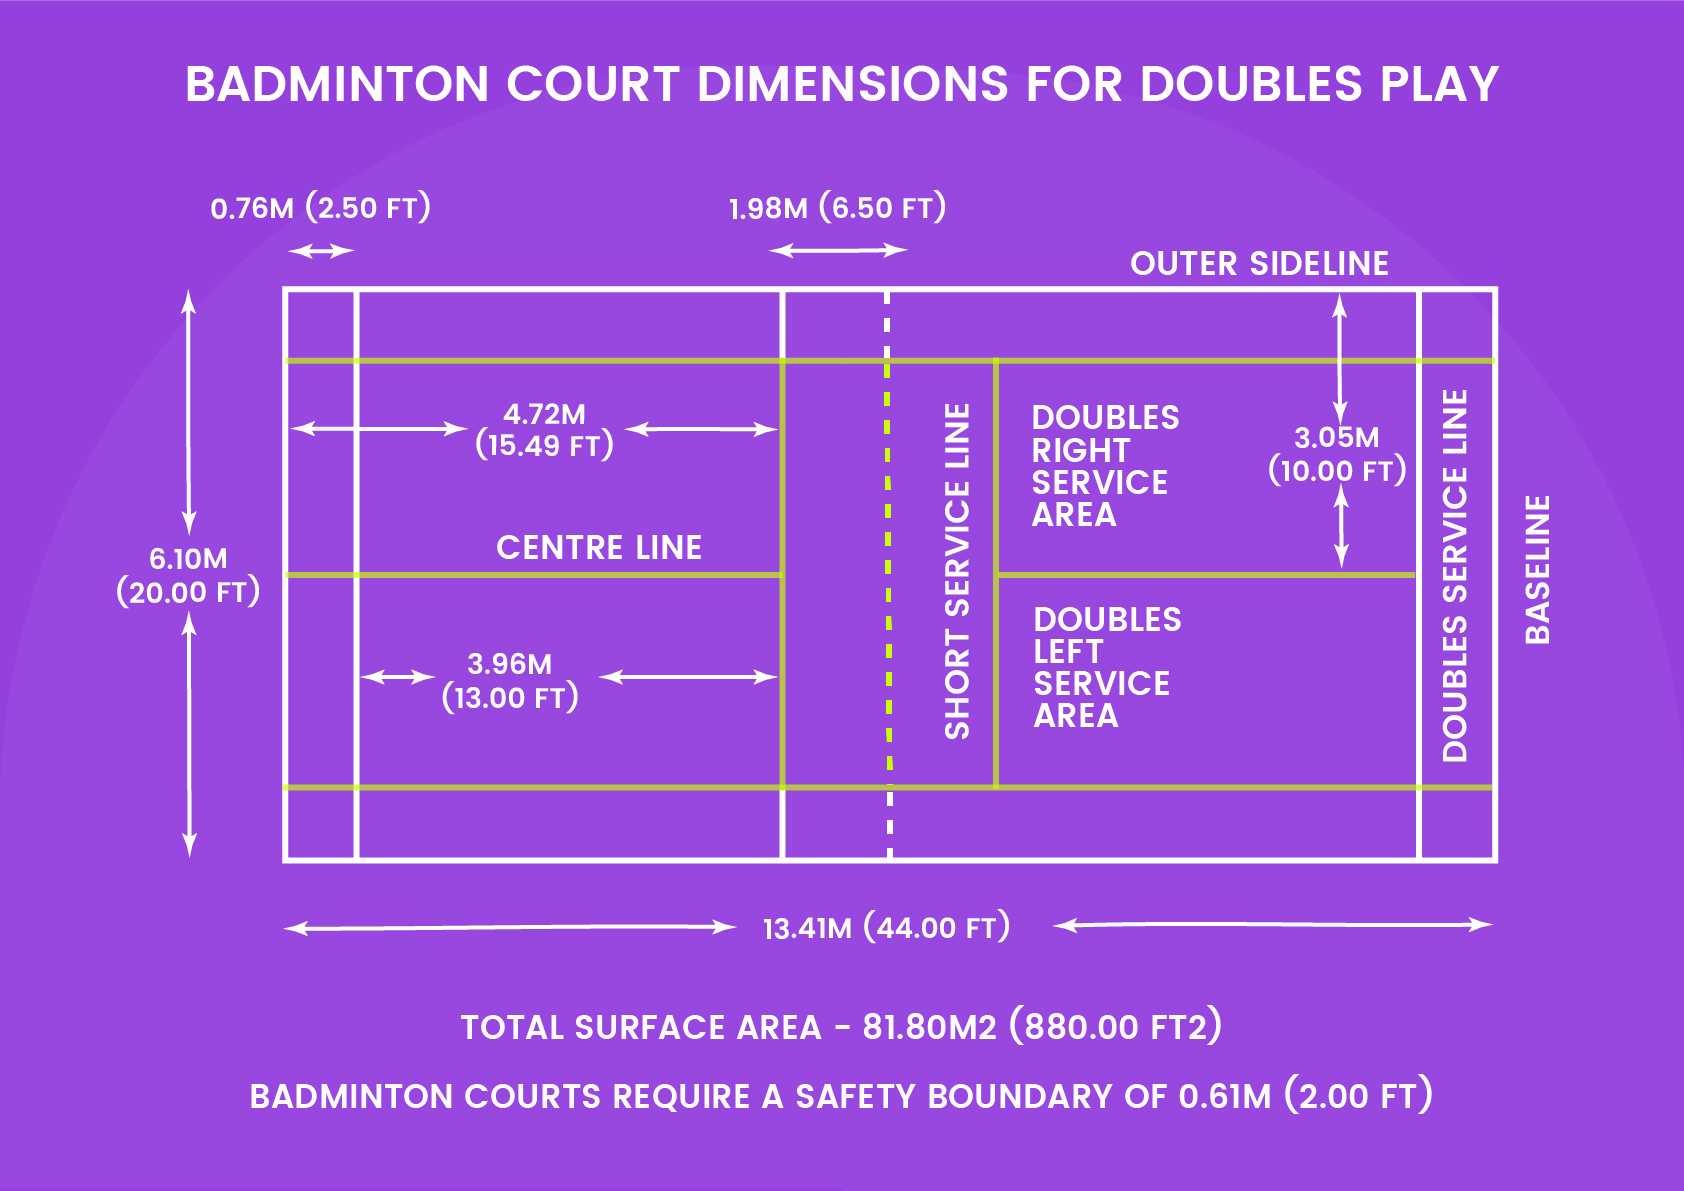 Badminton Court Dimensions for Doubles Play